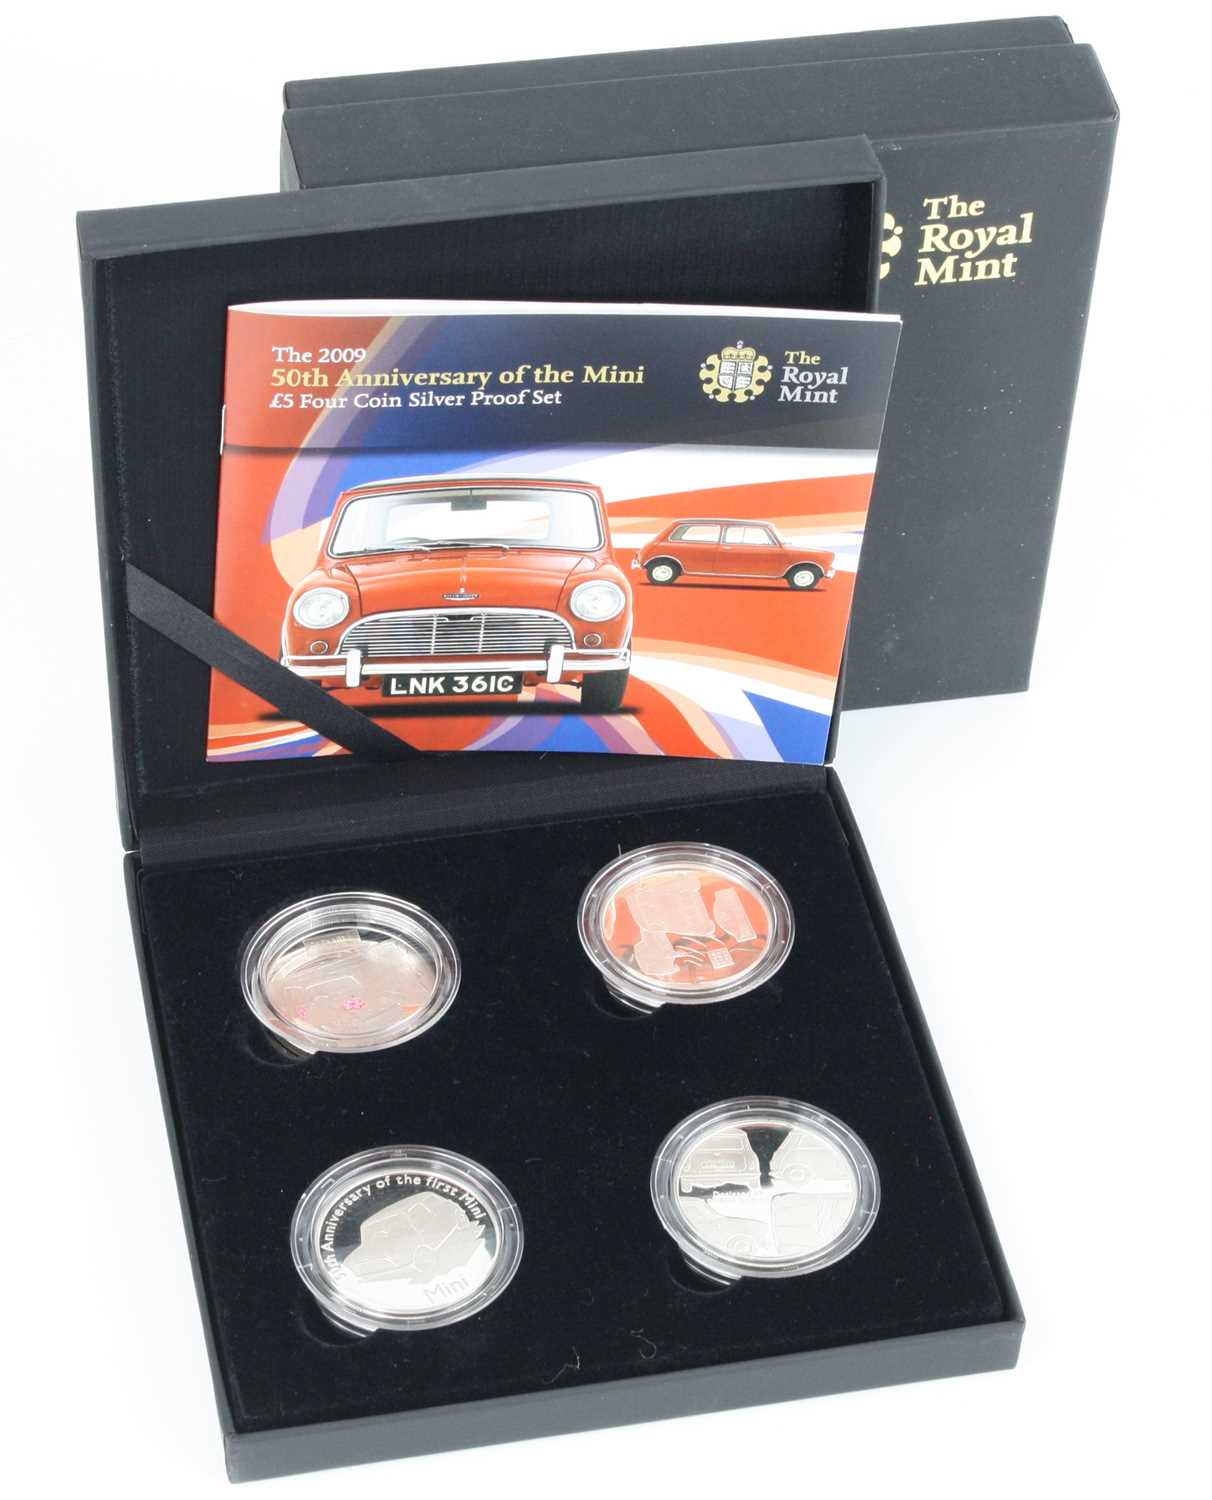 United Kingdom, The Royal Mint The 2009 50th Anniversary of the Mini £5 Four Coin Silver Proof